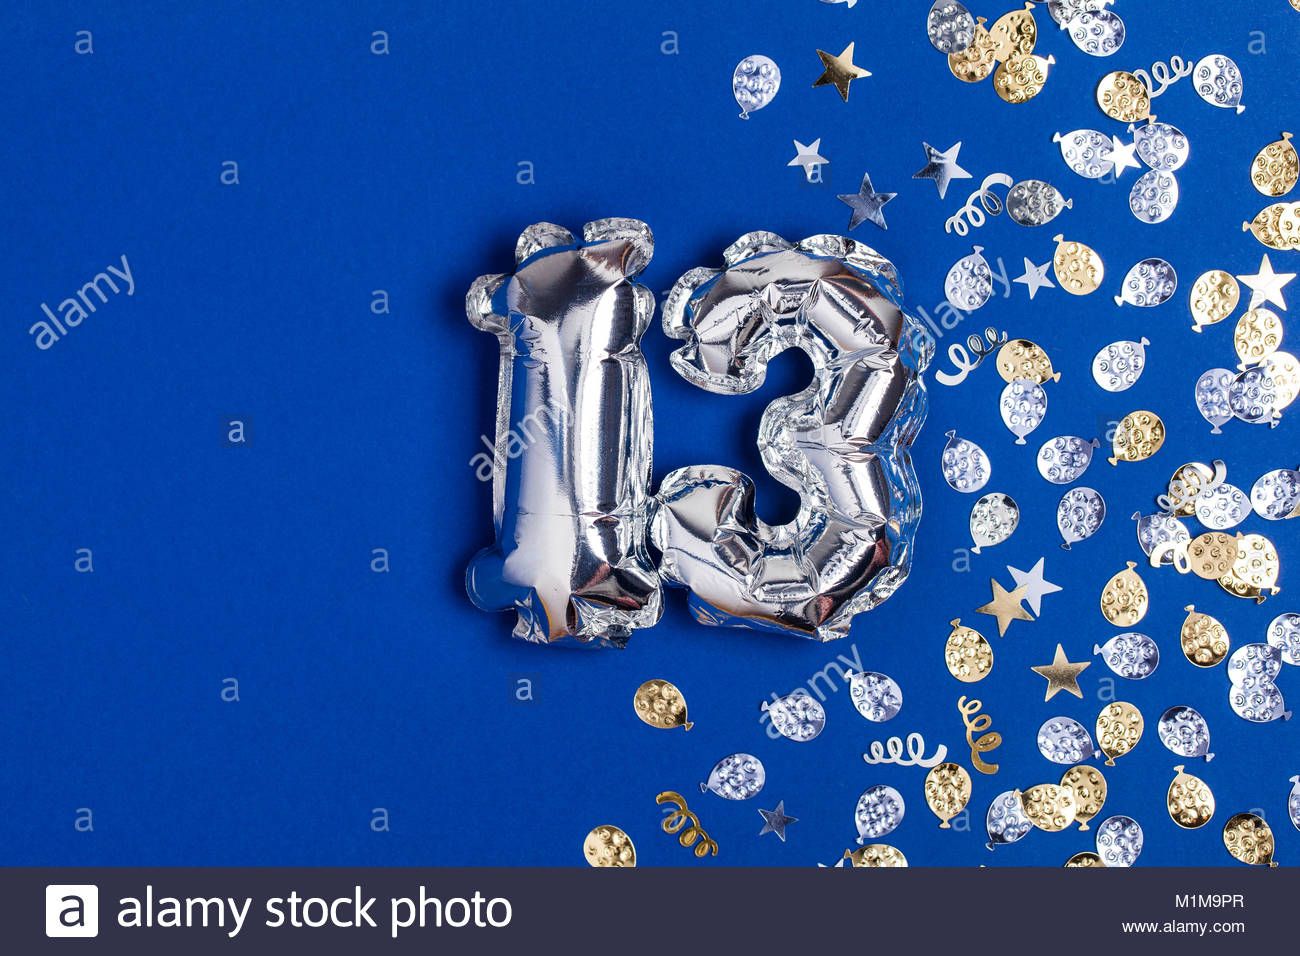 Silver foil number 13 balloon on a blue background with glitter